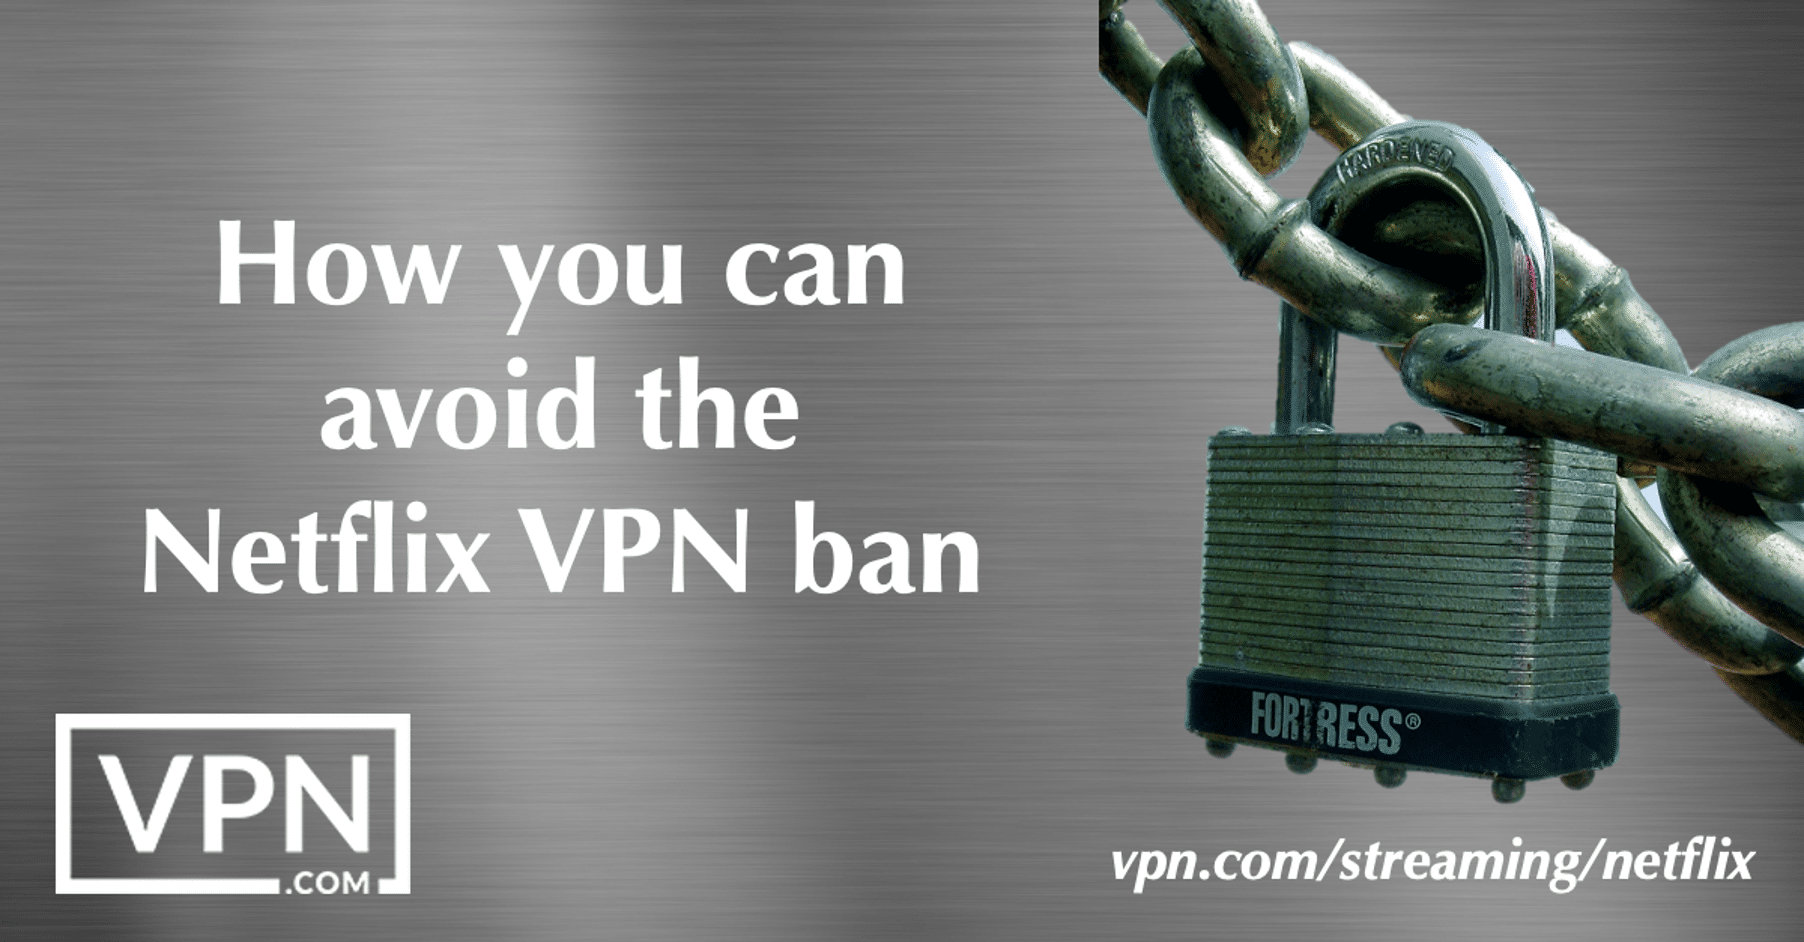 How you can avoid the Netflix VPN ban